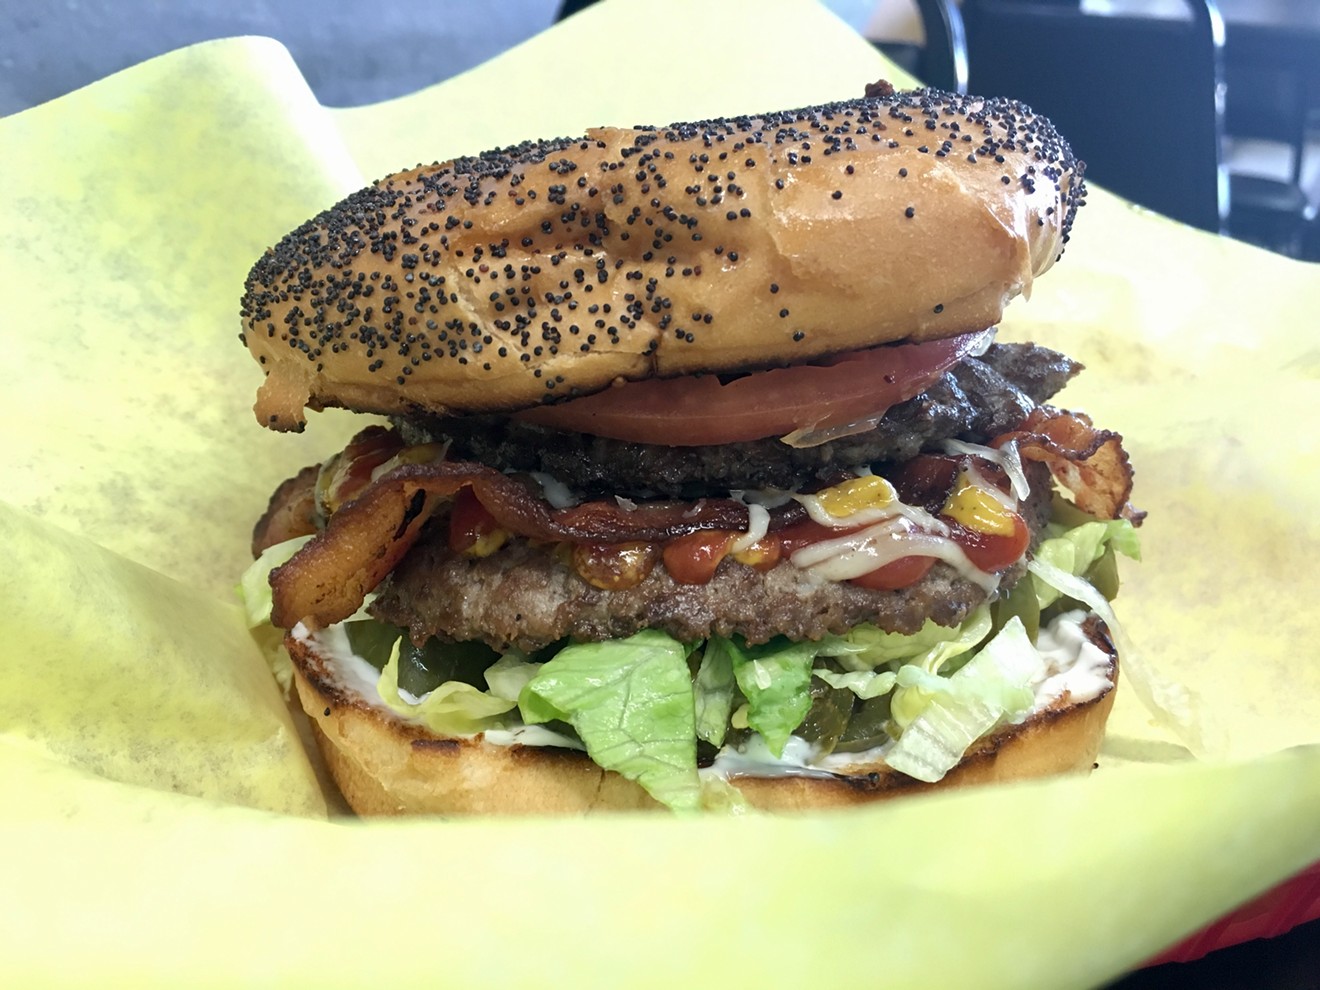 The Marco Special, a double cheeseburger with bacon, shredded cheese, jalapeno, pickle, mustard, mayo and ketchup for $6.39.